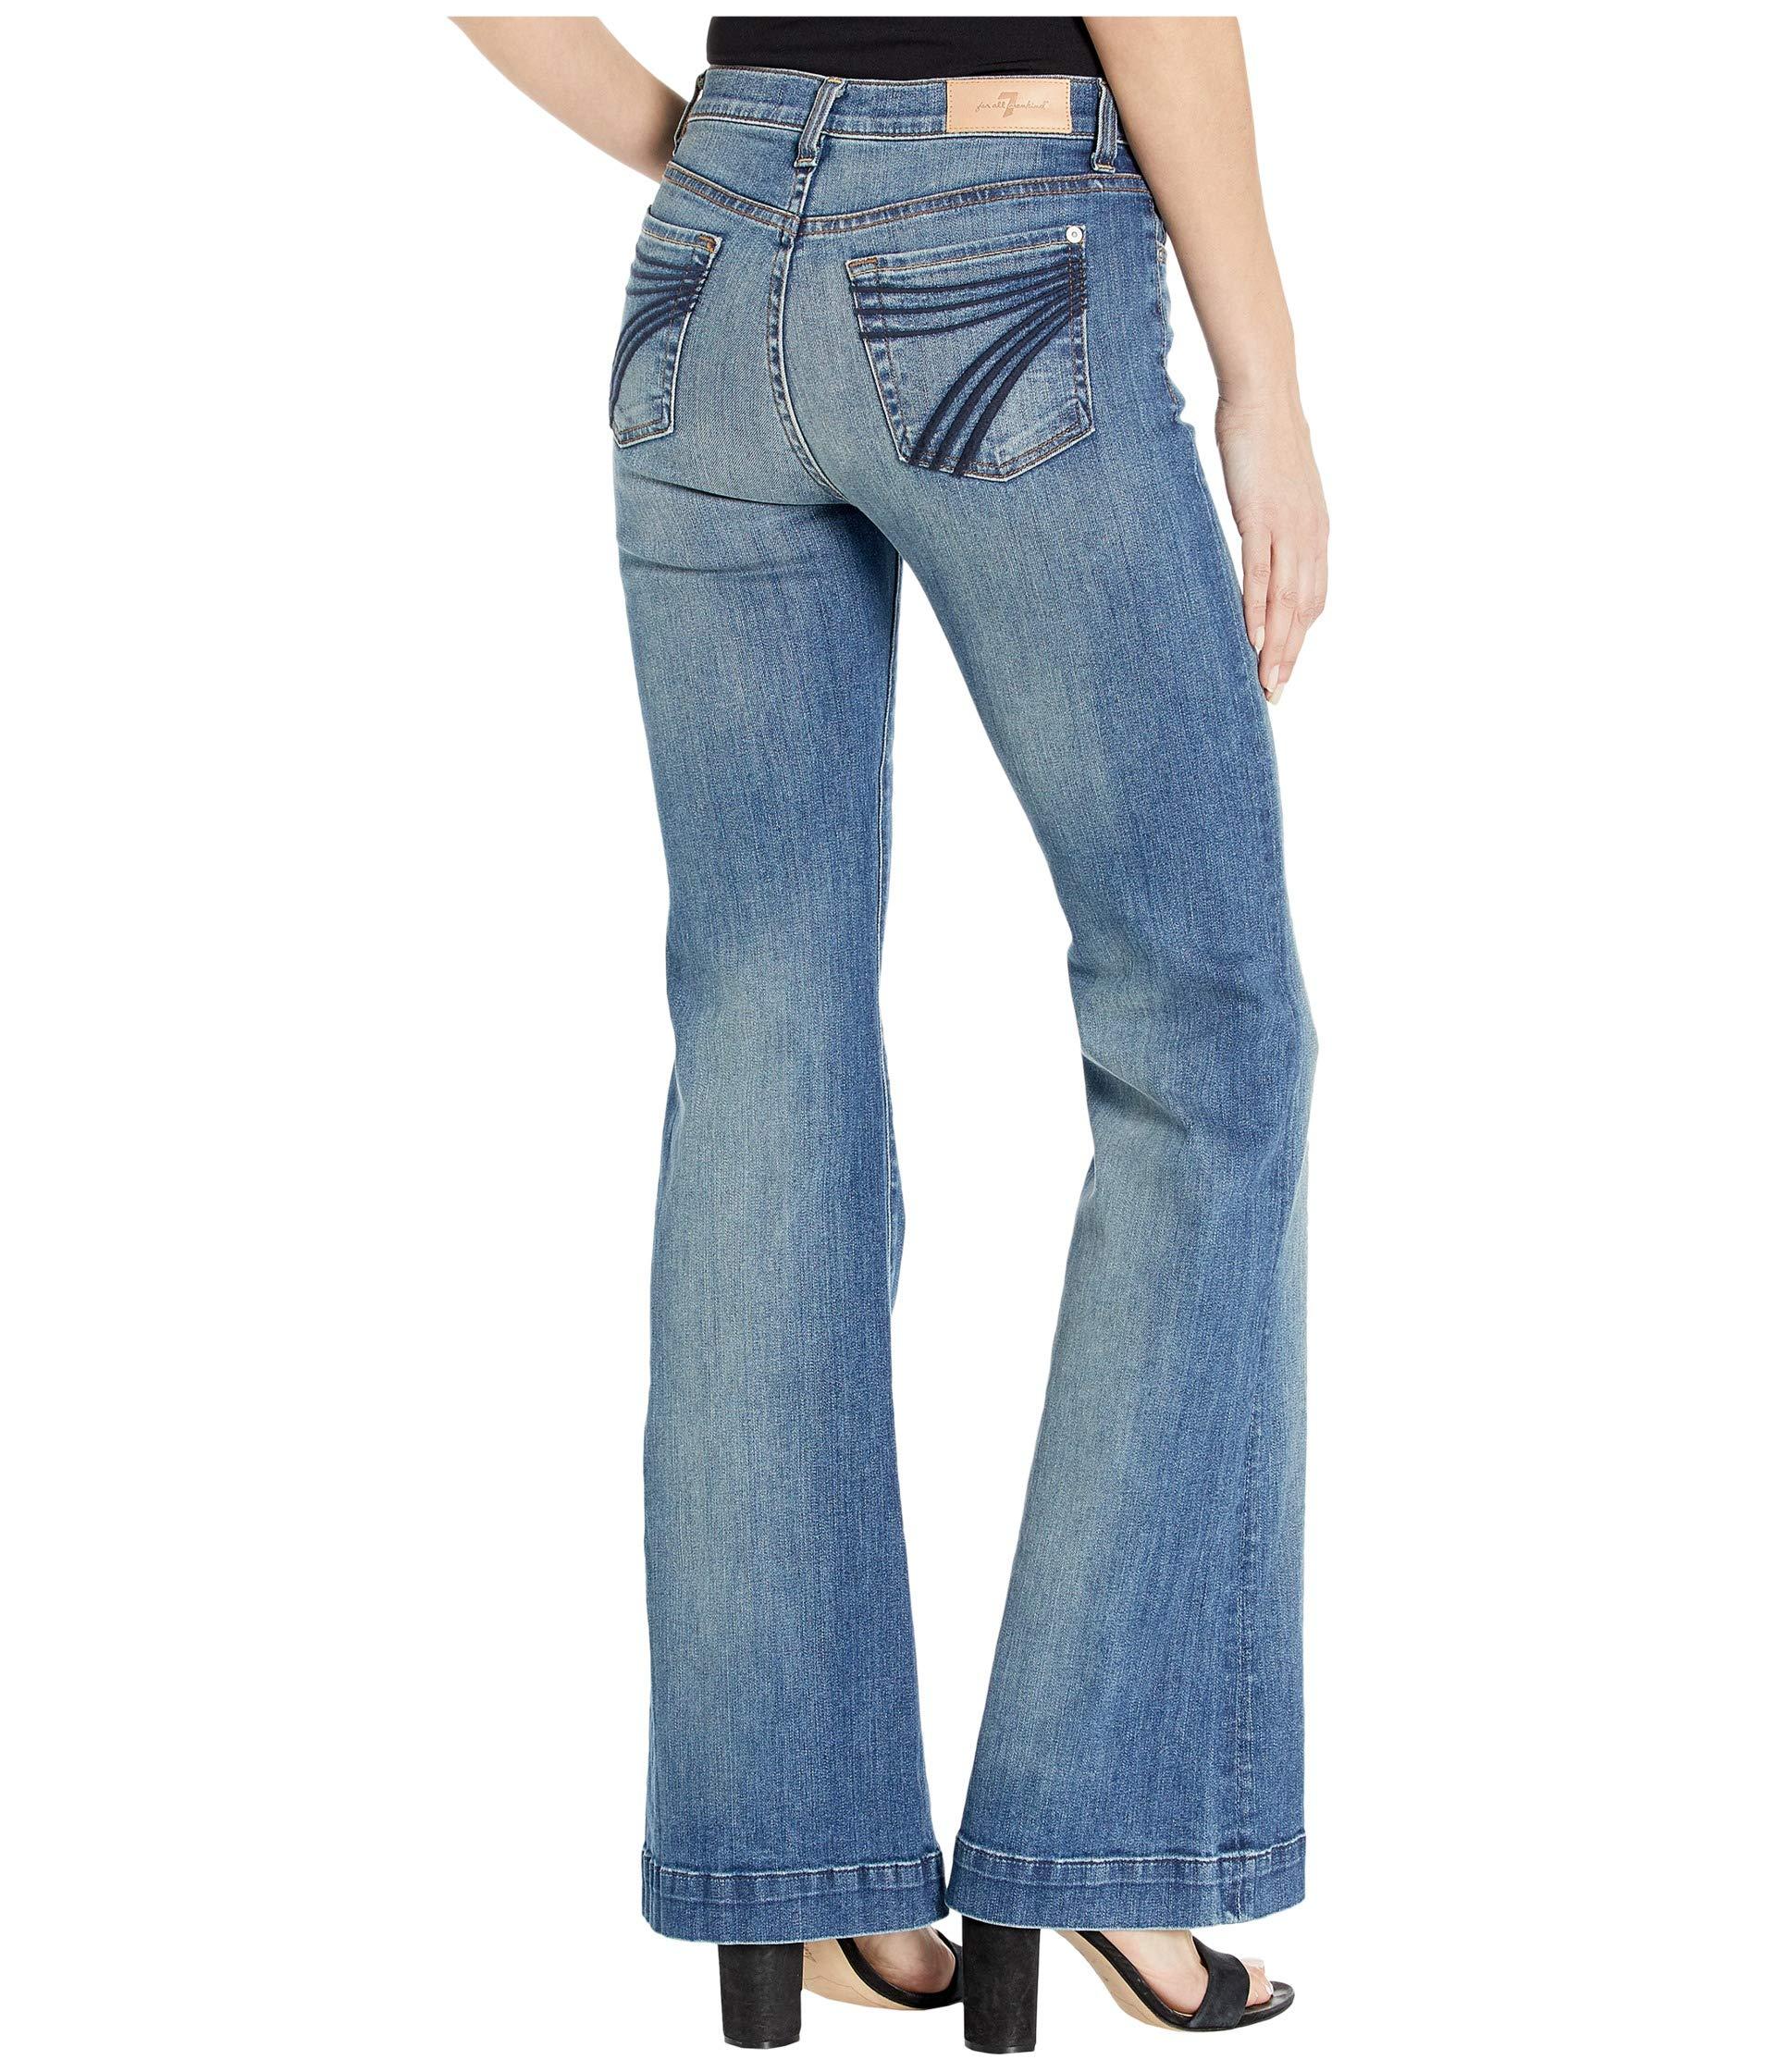 Seven For All Mankind® Ladies' Luxe Vintage Dojo Jeans in